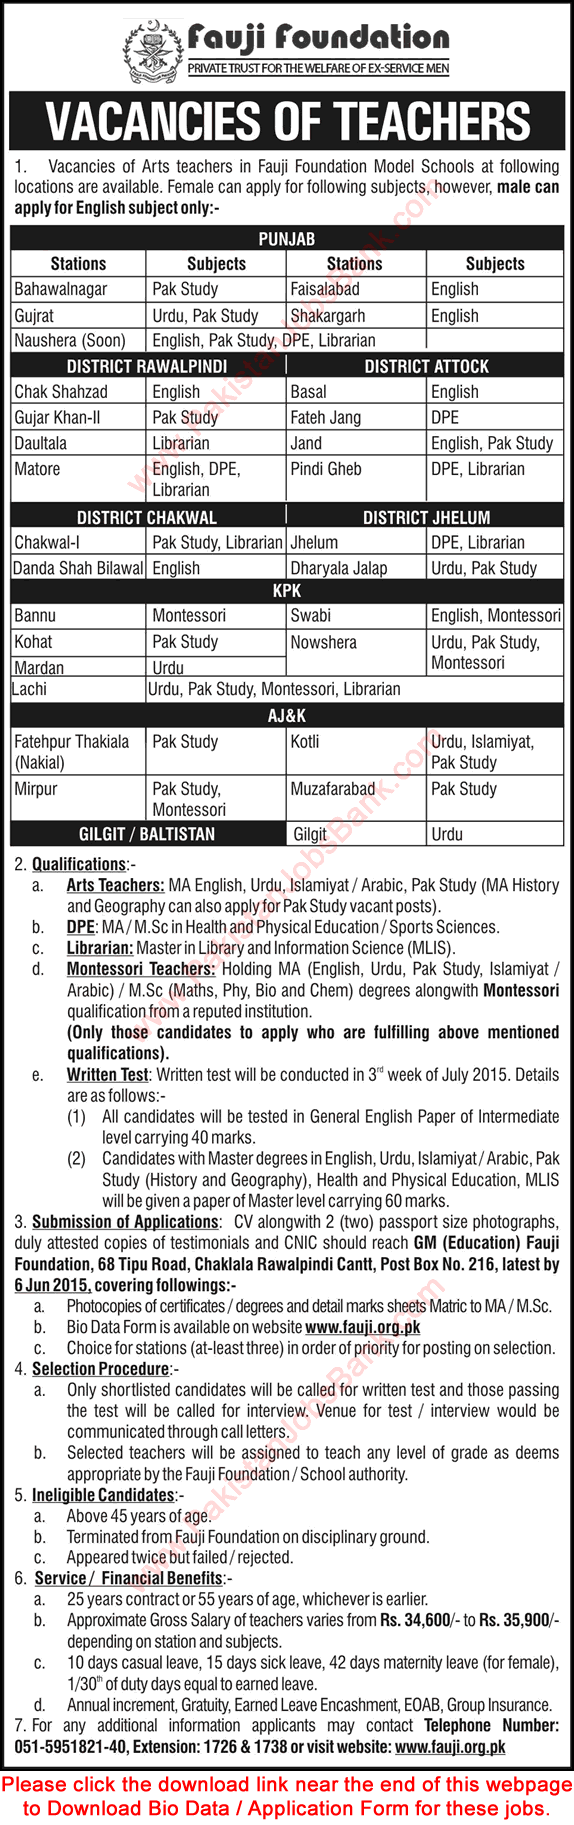 Teaching Jobs in Fauji Foundation Model Schools May 2015 Application Form Download Latest